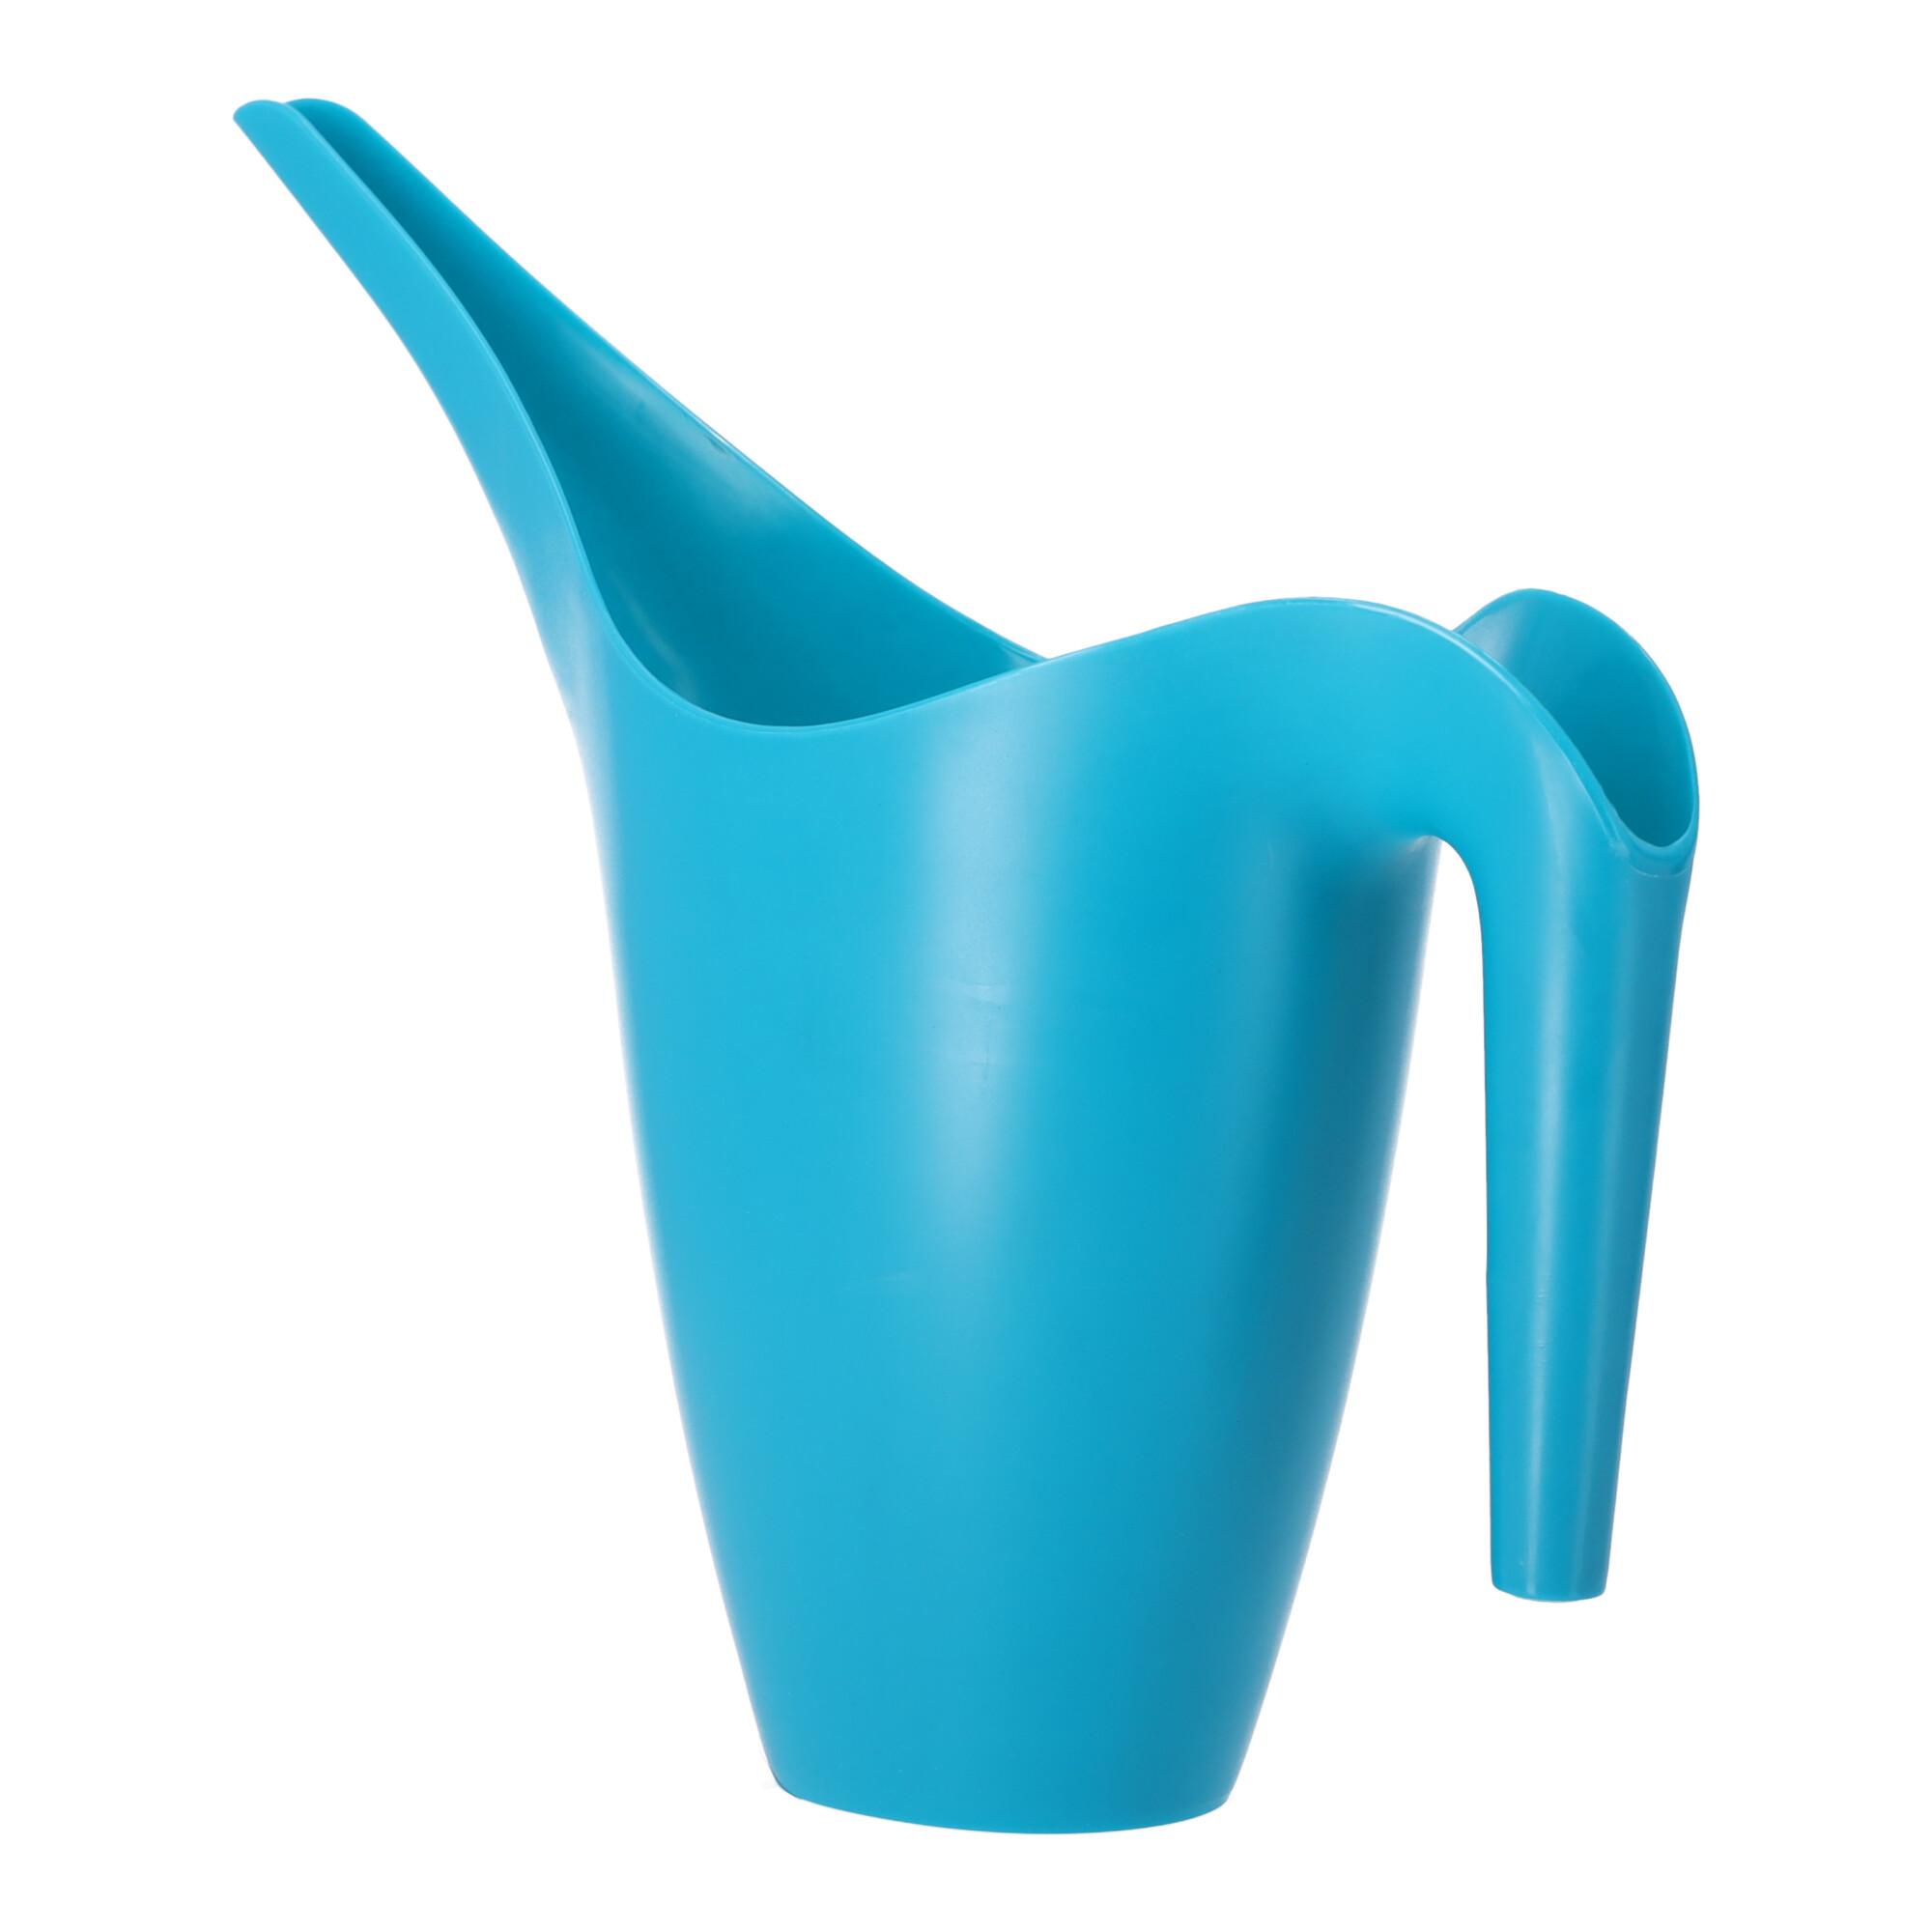 Garden, home watering can 1.5 L - blue